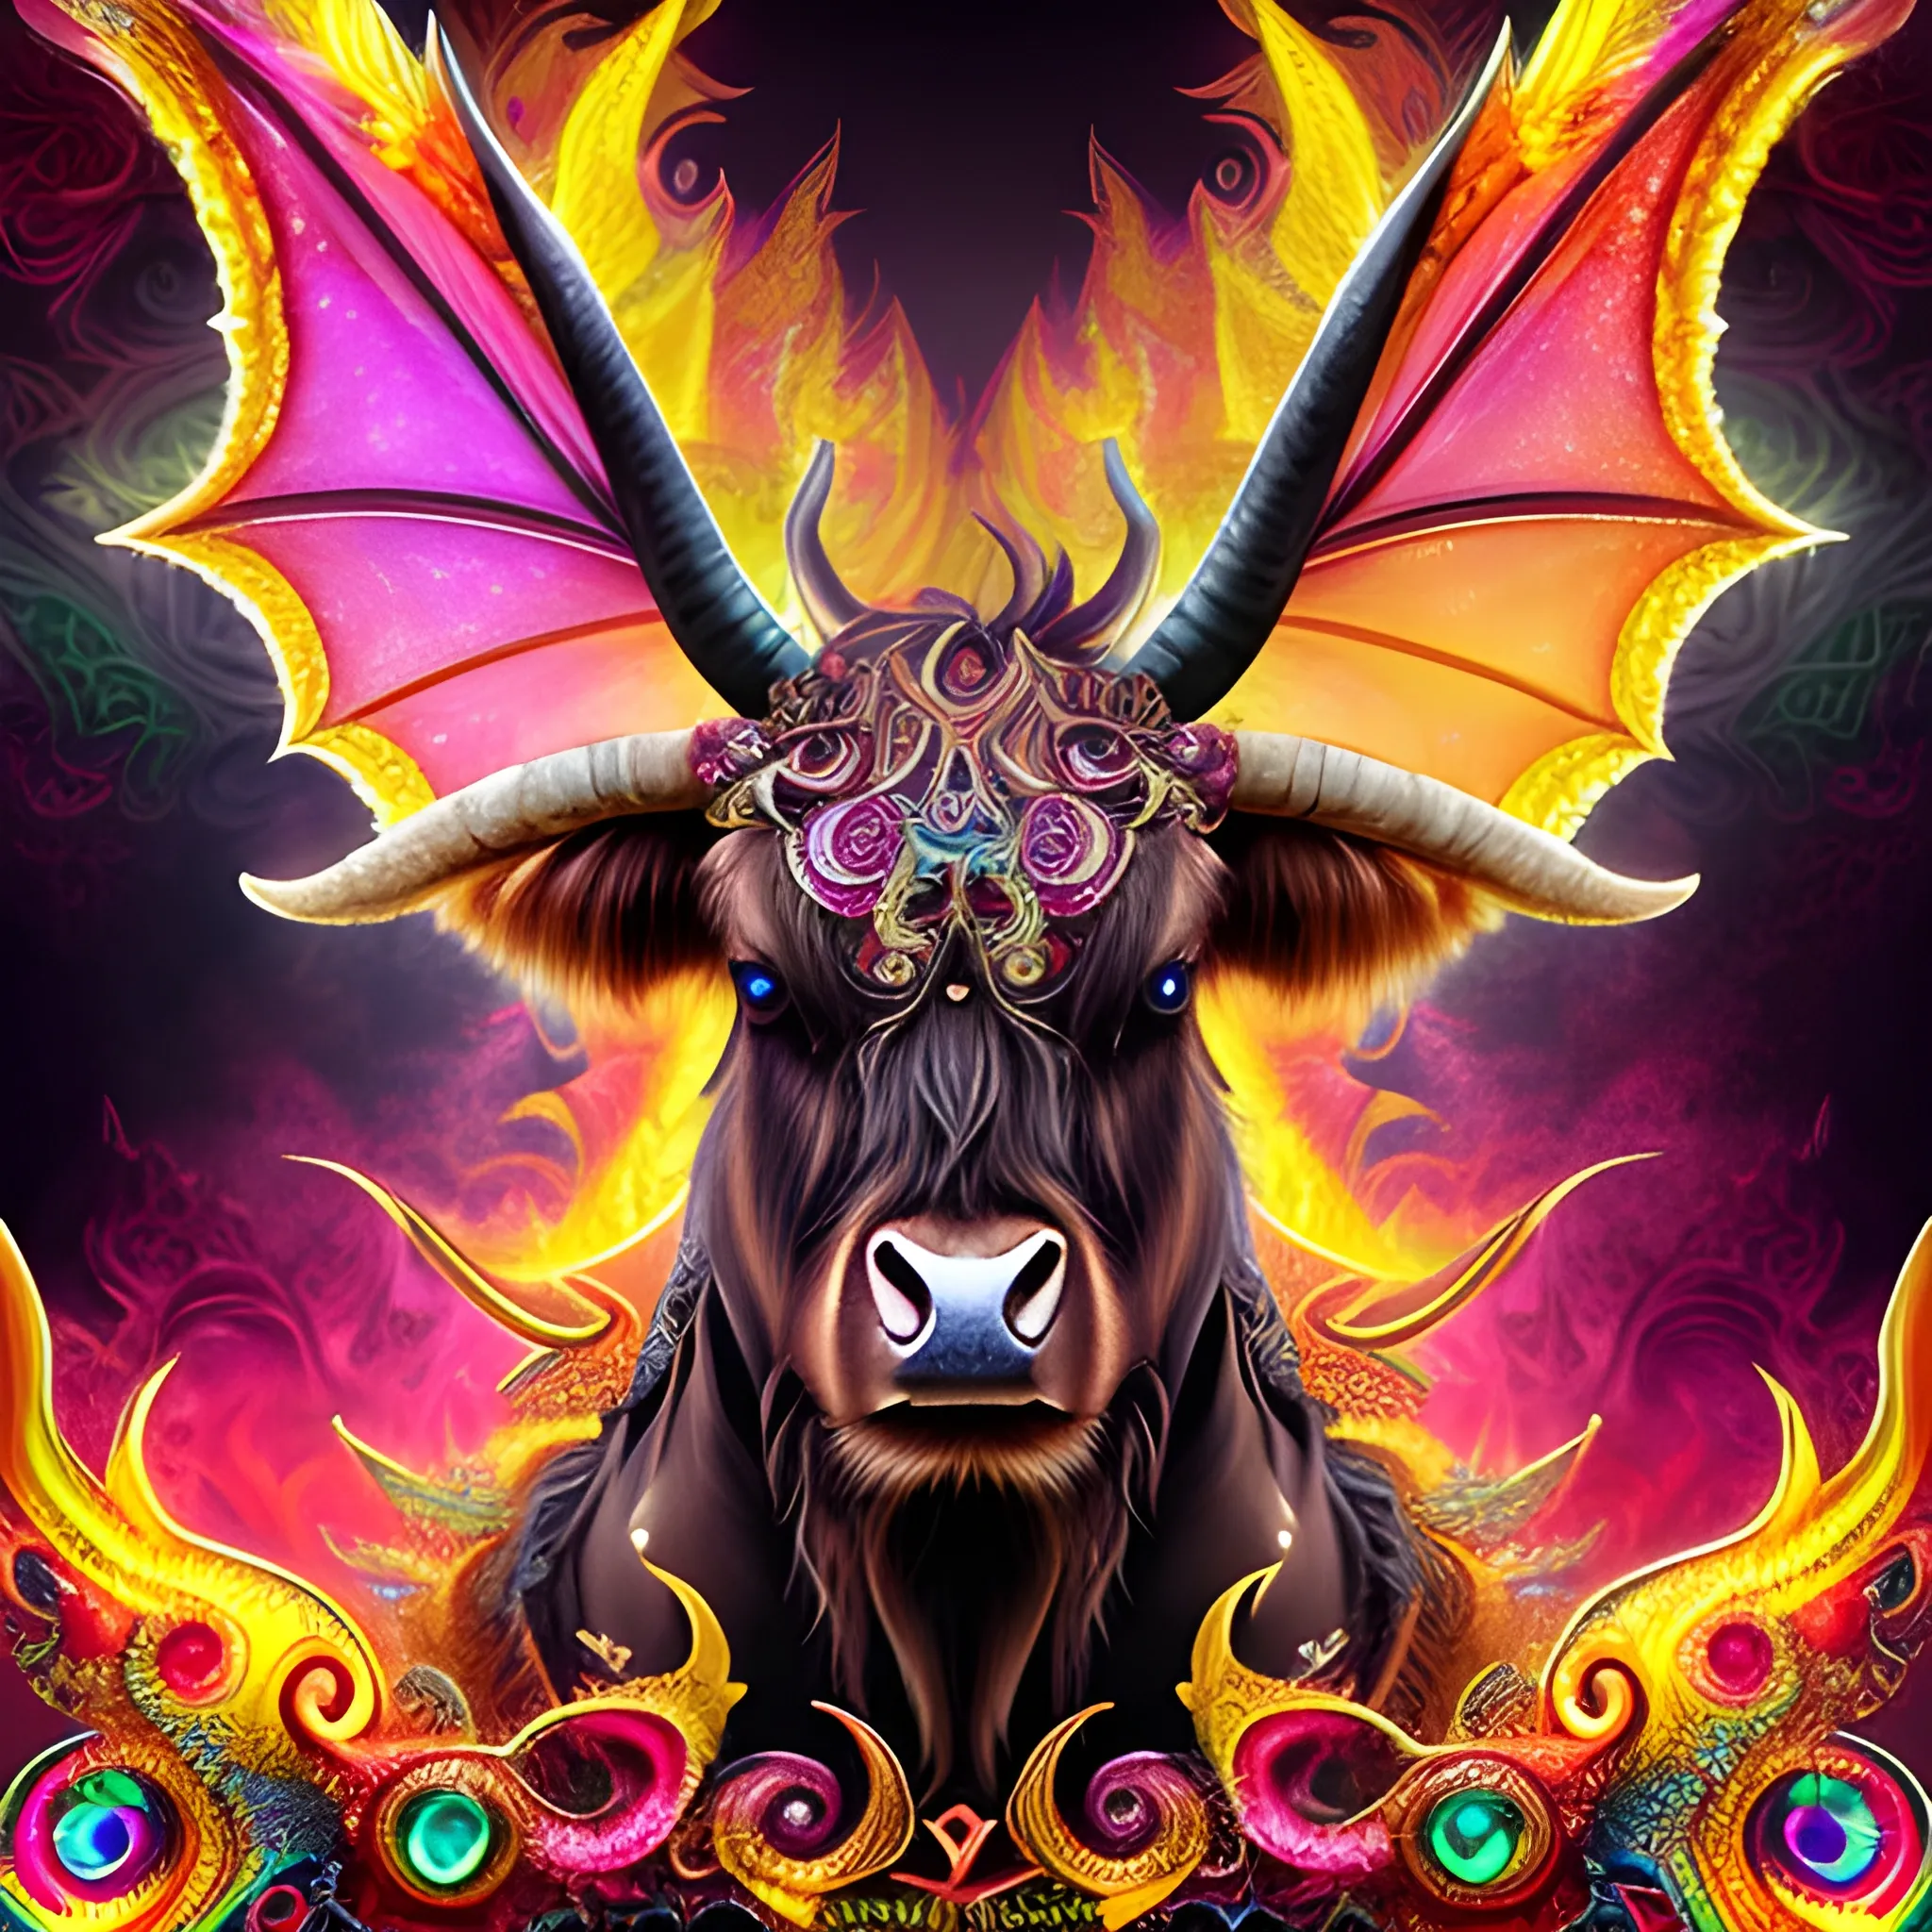 dragon highland Cow,  fire psychedelic, cute eyes, dragon wings, bear claws, peacock feathers, filigree laser fractal details, glistening shiny scales, intricate ornate hypermaximalist sharp focus, dramatic lighting, highly detailed and intricate, hyper maximalist, ornate, photographic style, luxury, elite, haunting matte painting, cinematic